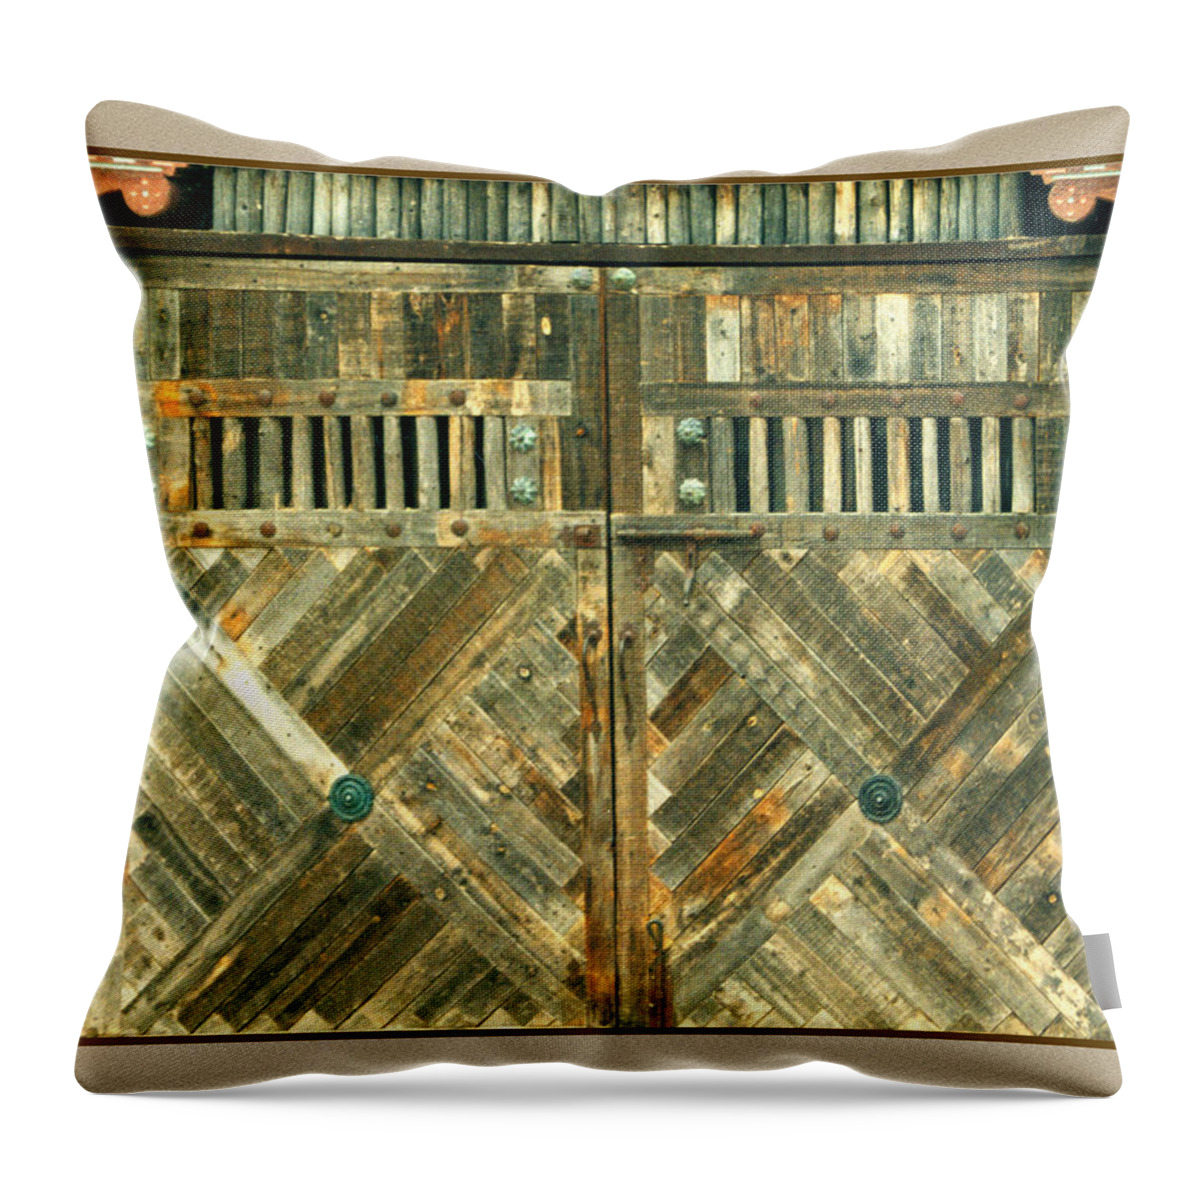 Abstract Patterns Of New Mexico Portals Throw Pillow featuring the photograph Abstract New Mexico Portals by Jack Pumphrey